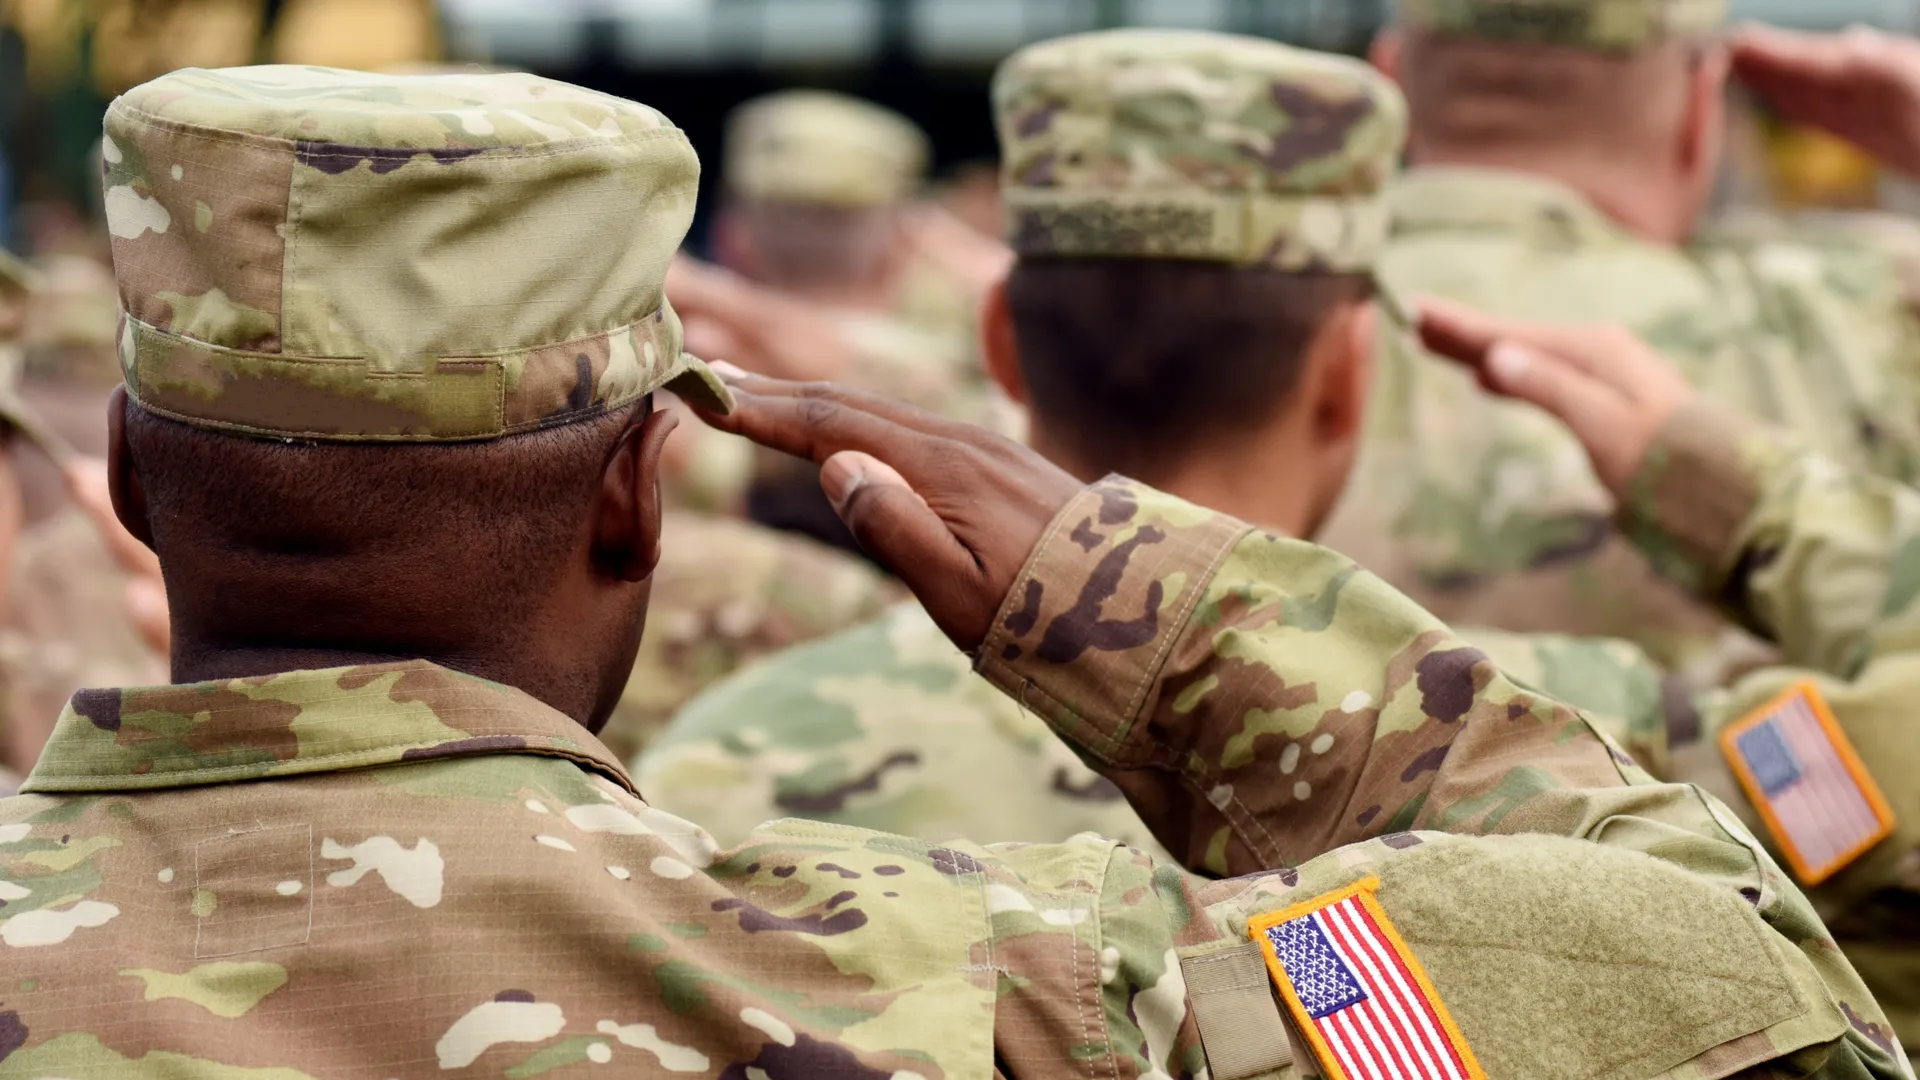 US soldier salute. US army. US troops. Military of USA.